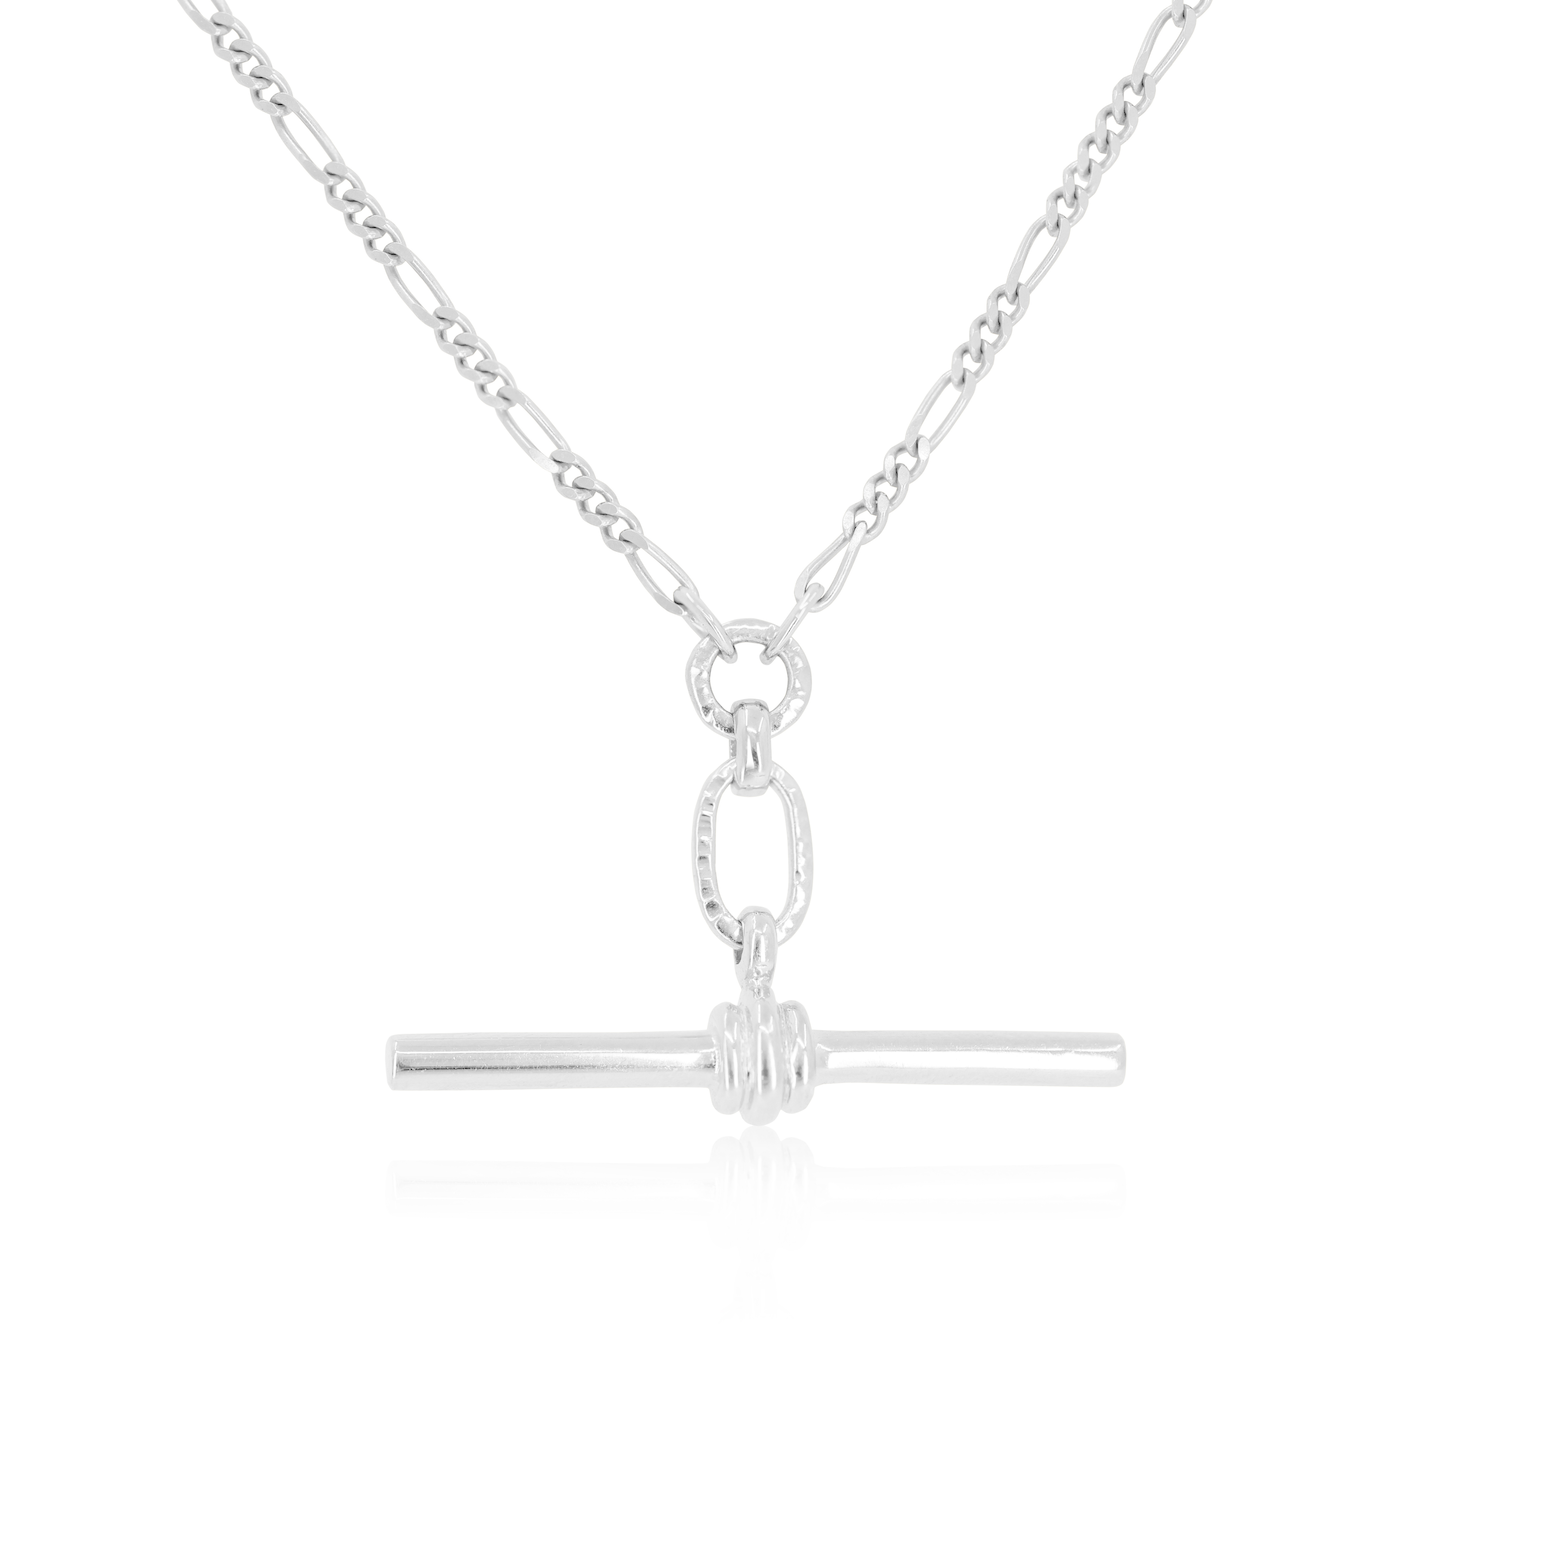 Fob Silver Necklace